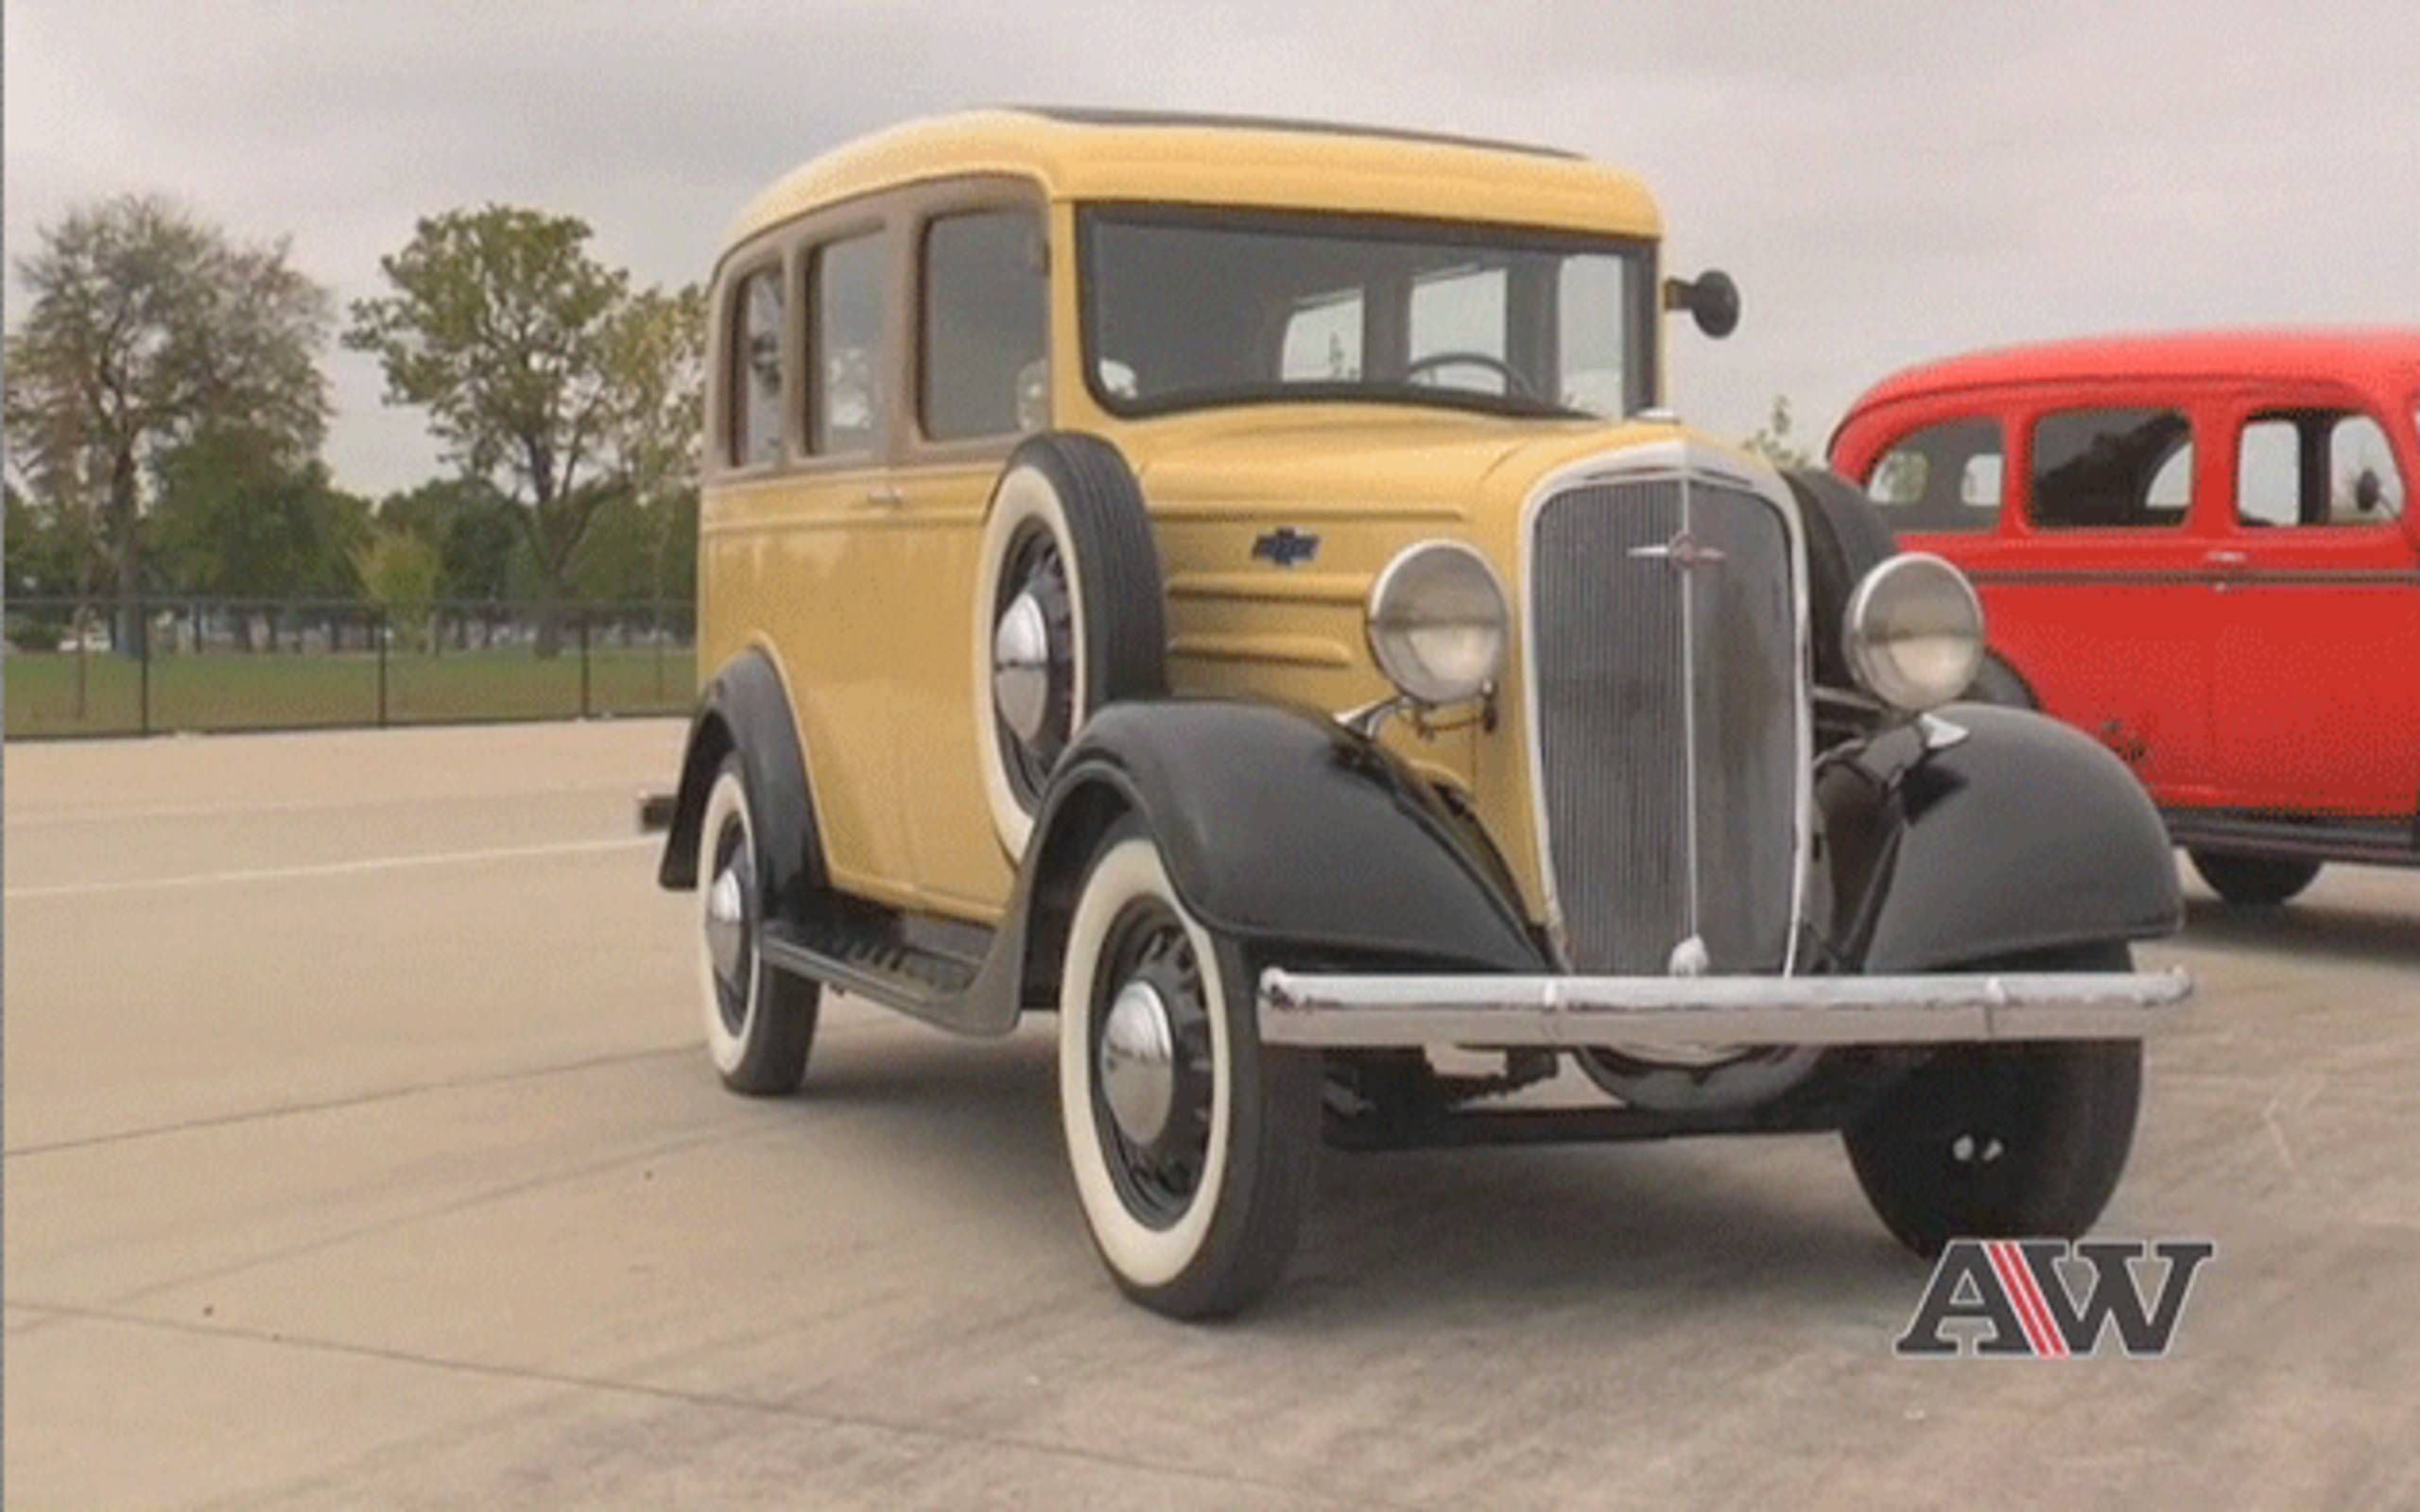 Chevy Suburban turns 75, an AW video interview